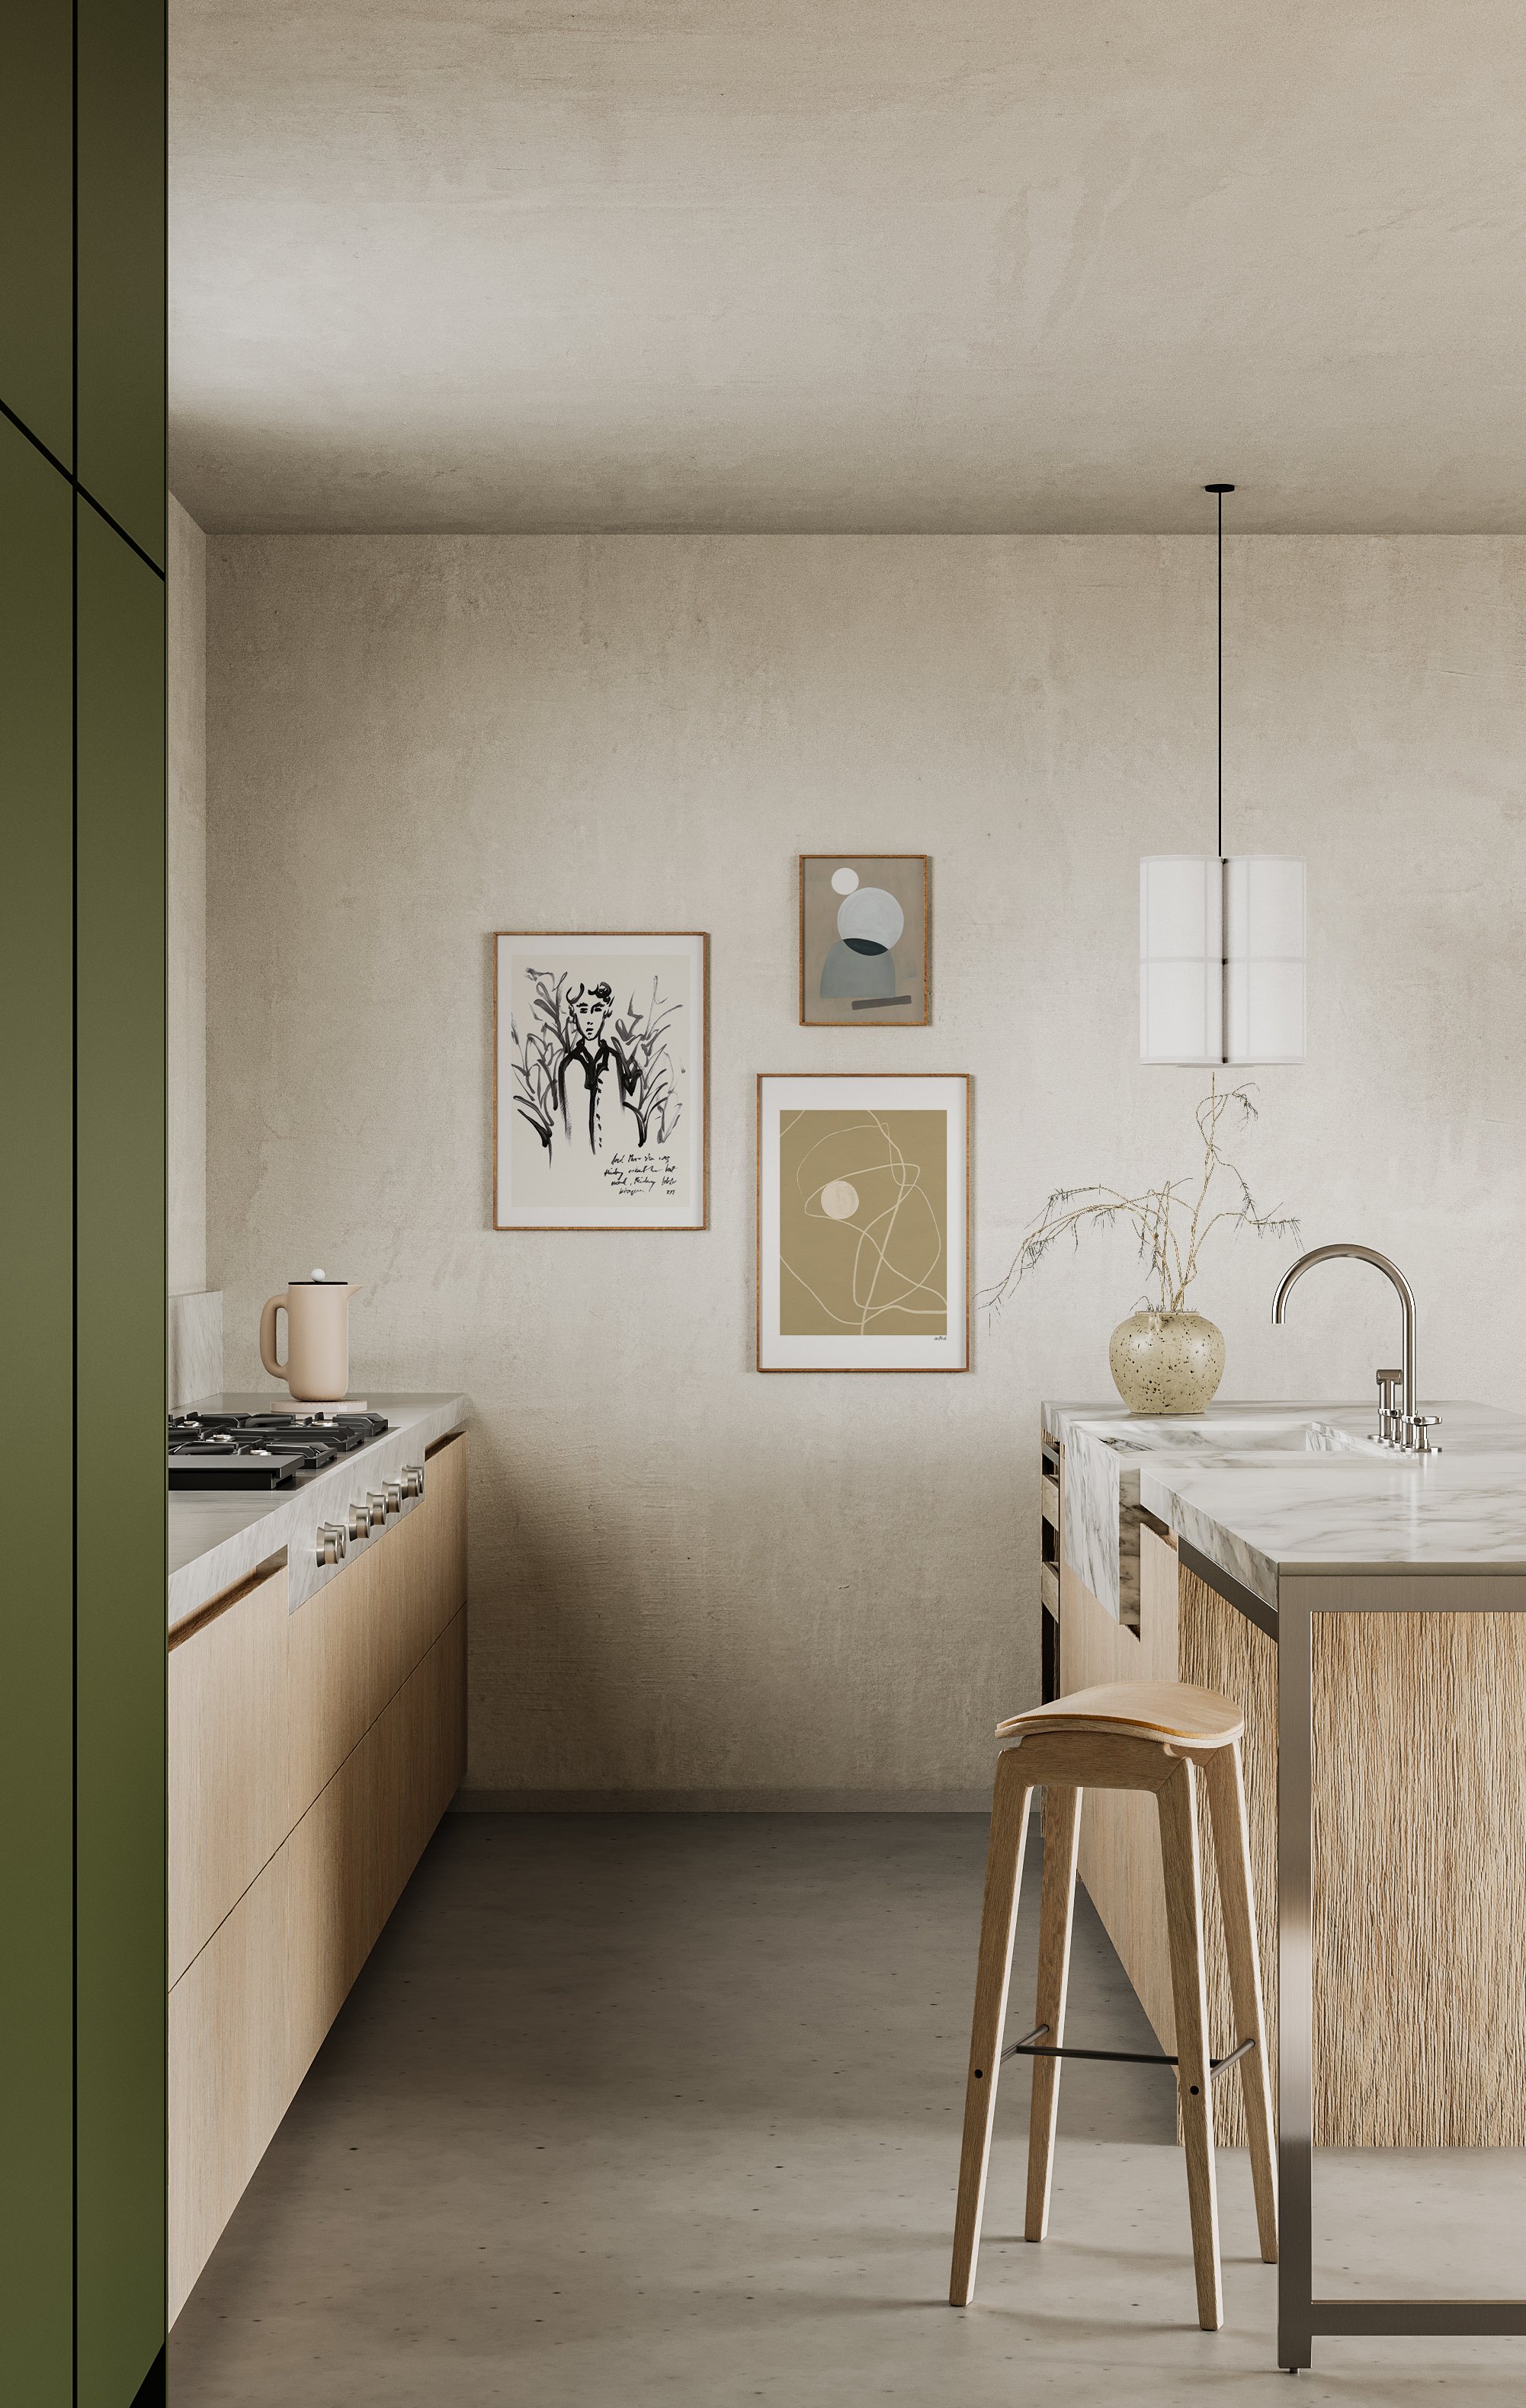 a minimal kitchen with beauitful artwork on the wall